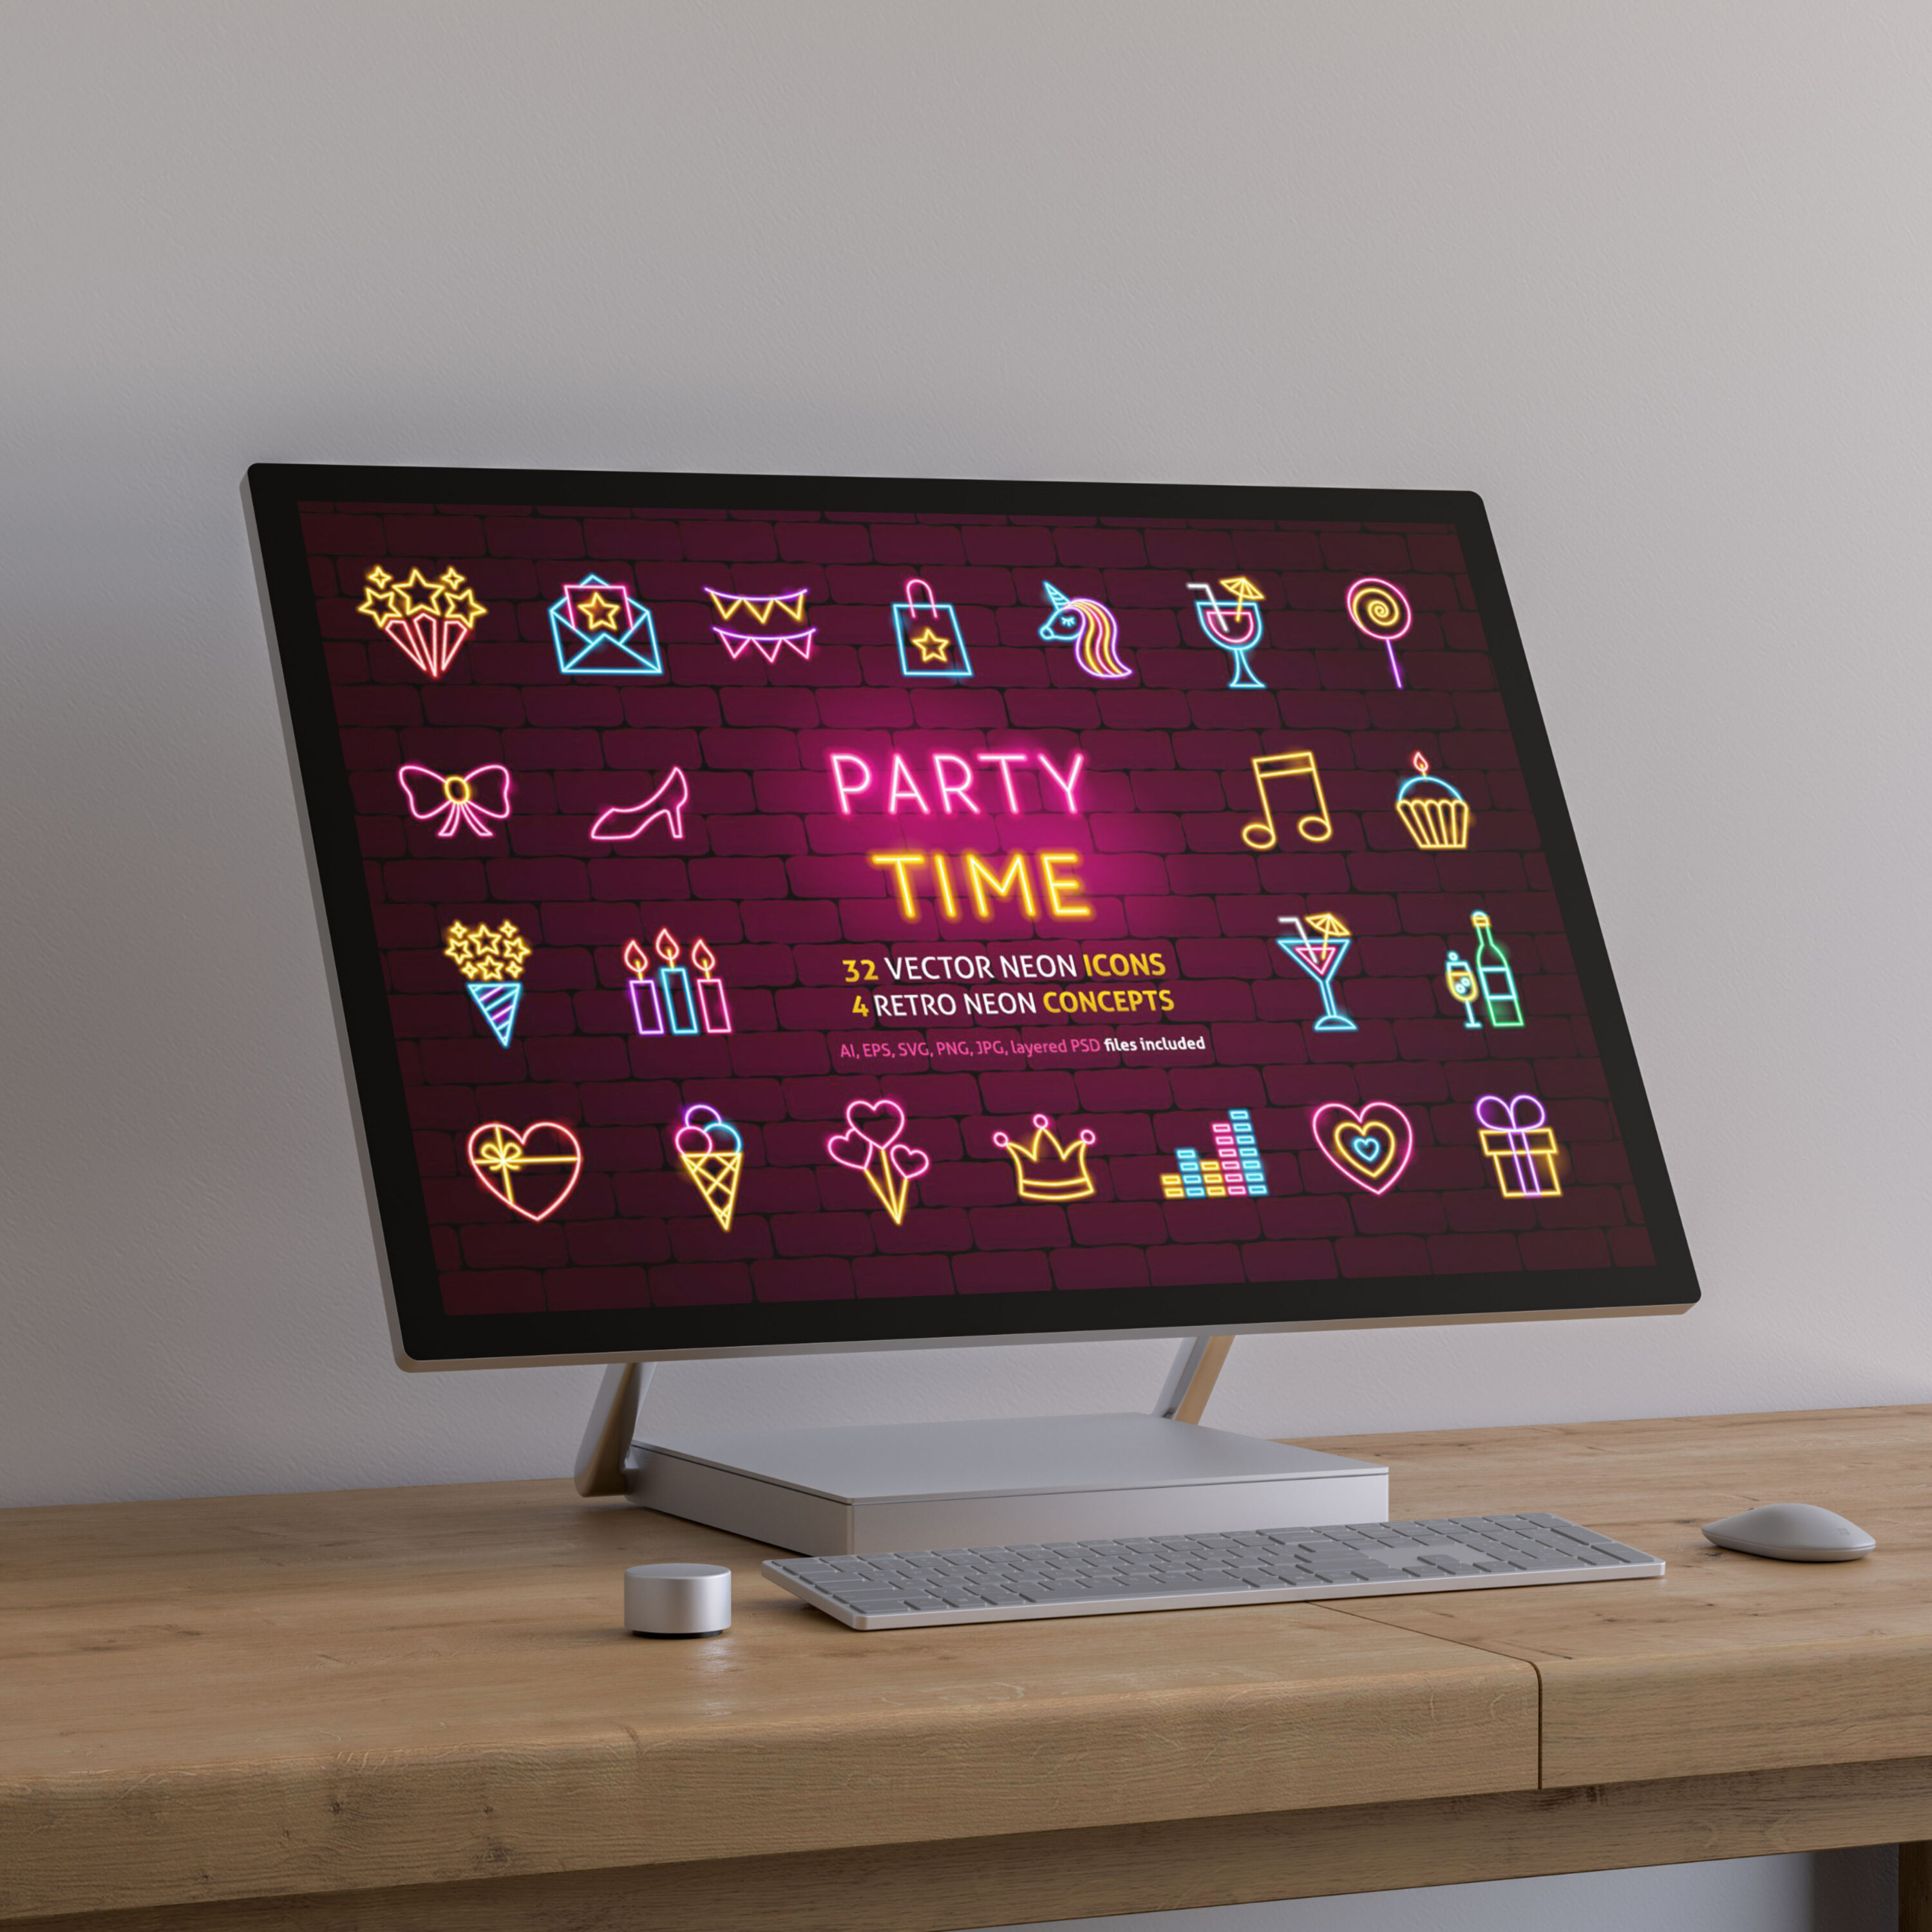 Prints of party neon.